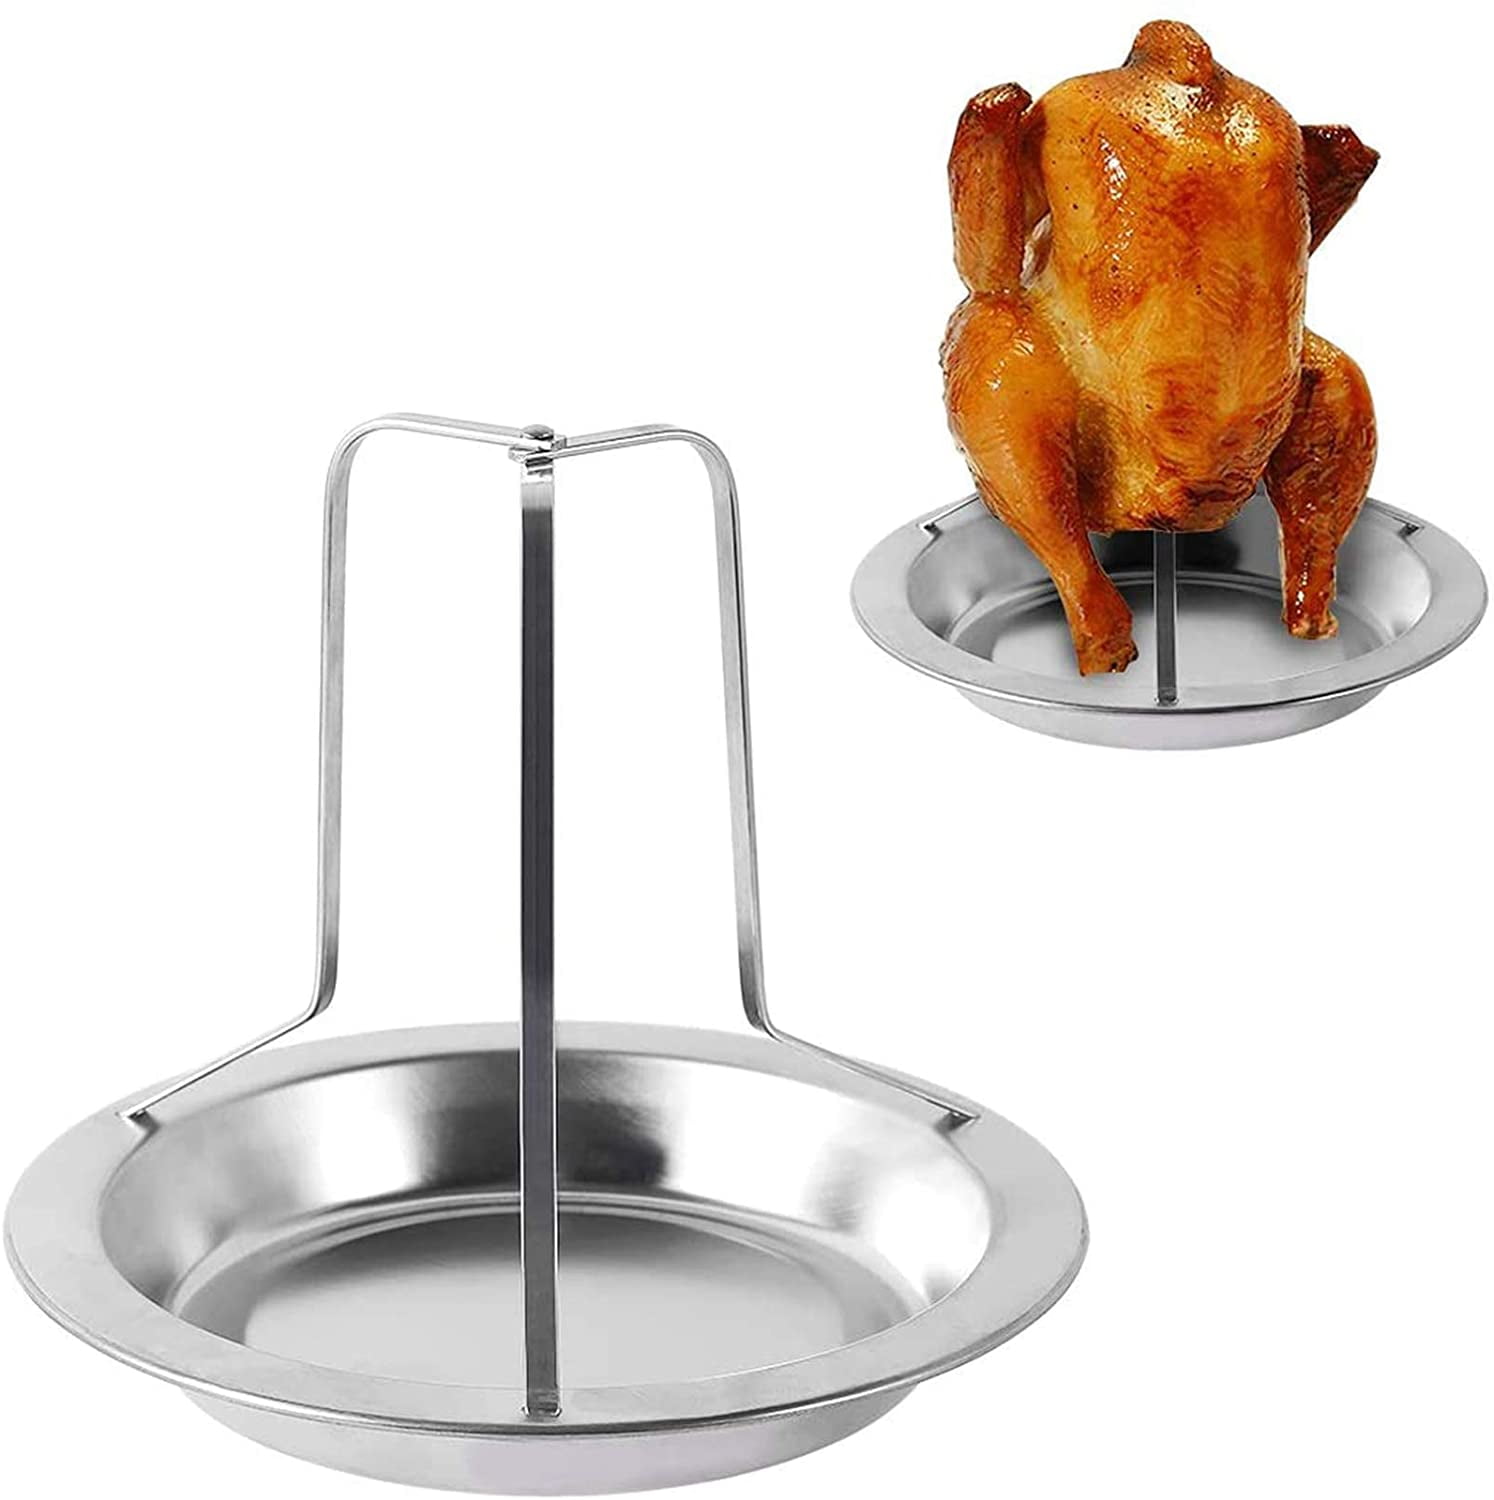 BARBECUE BBQ BEER CAN CHICKEN ROASTER VERTICAL CHICKEN COOK STAND HOLDER 